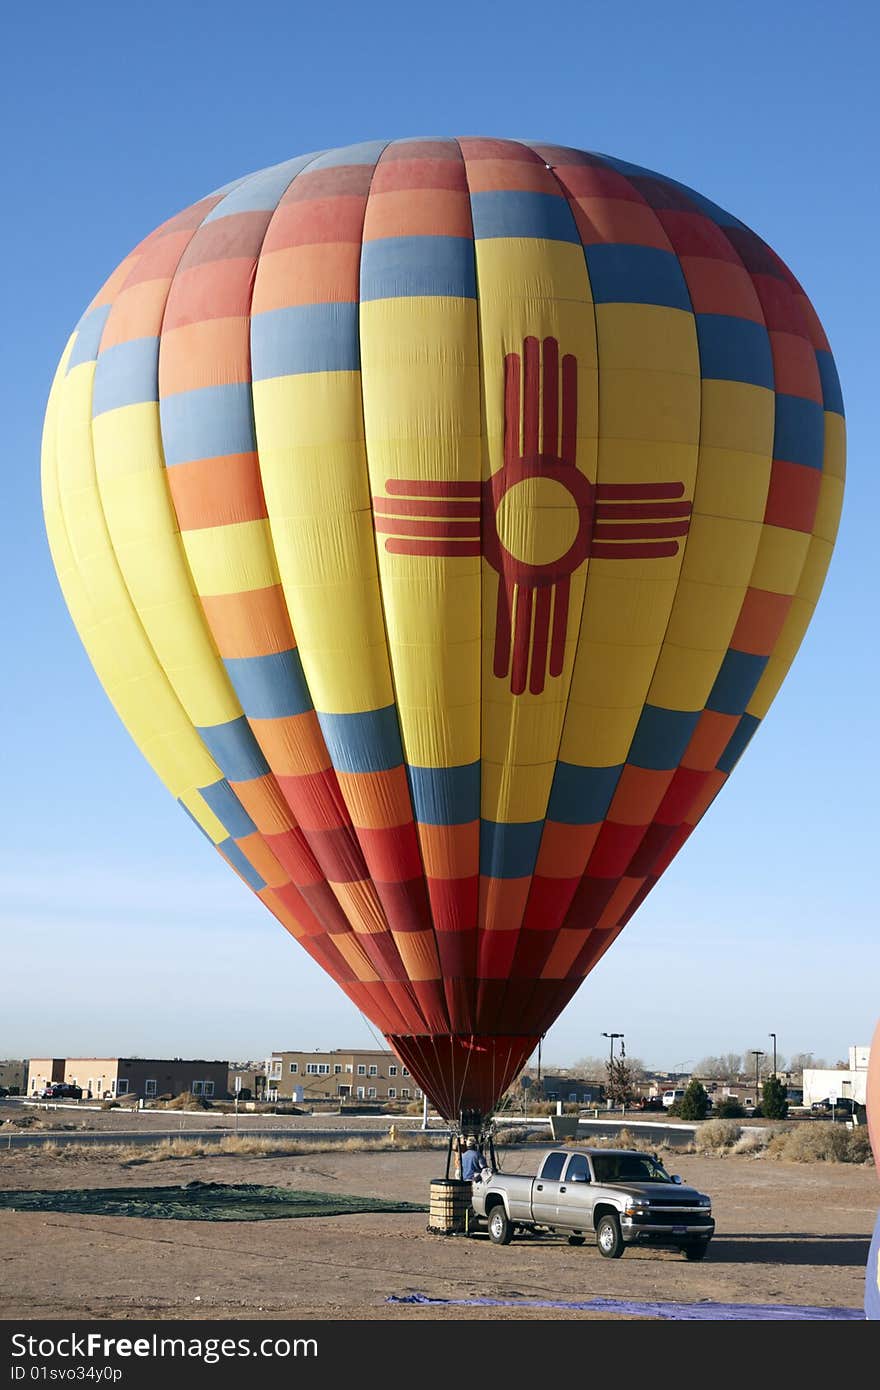 Hot air balloon on the ground with car